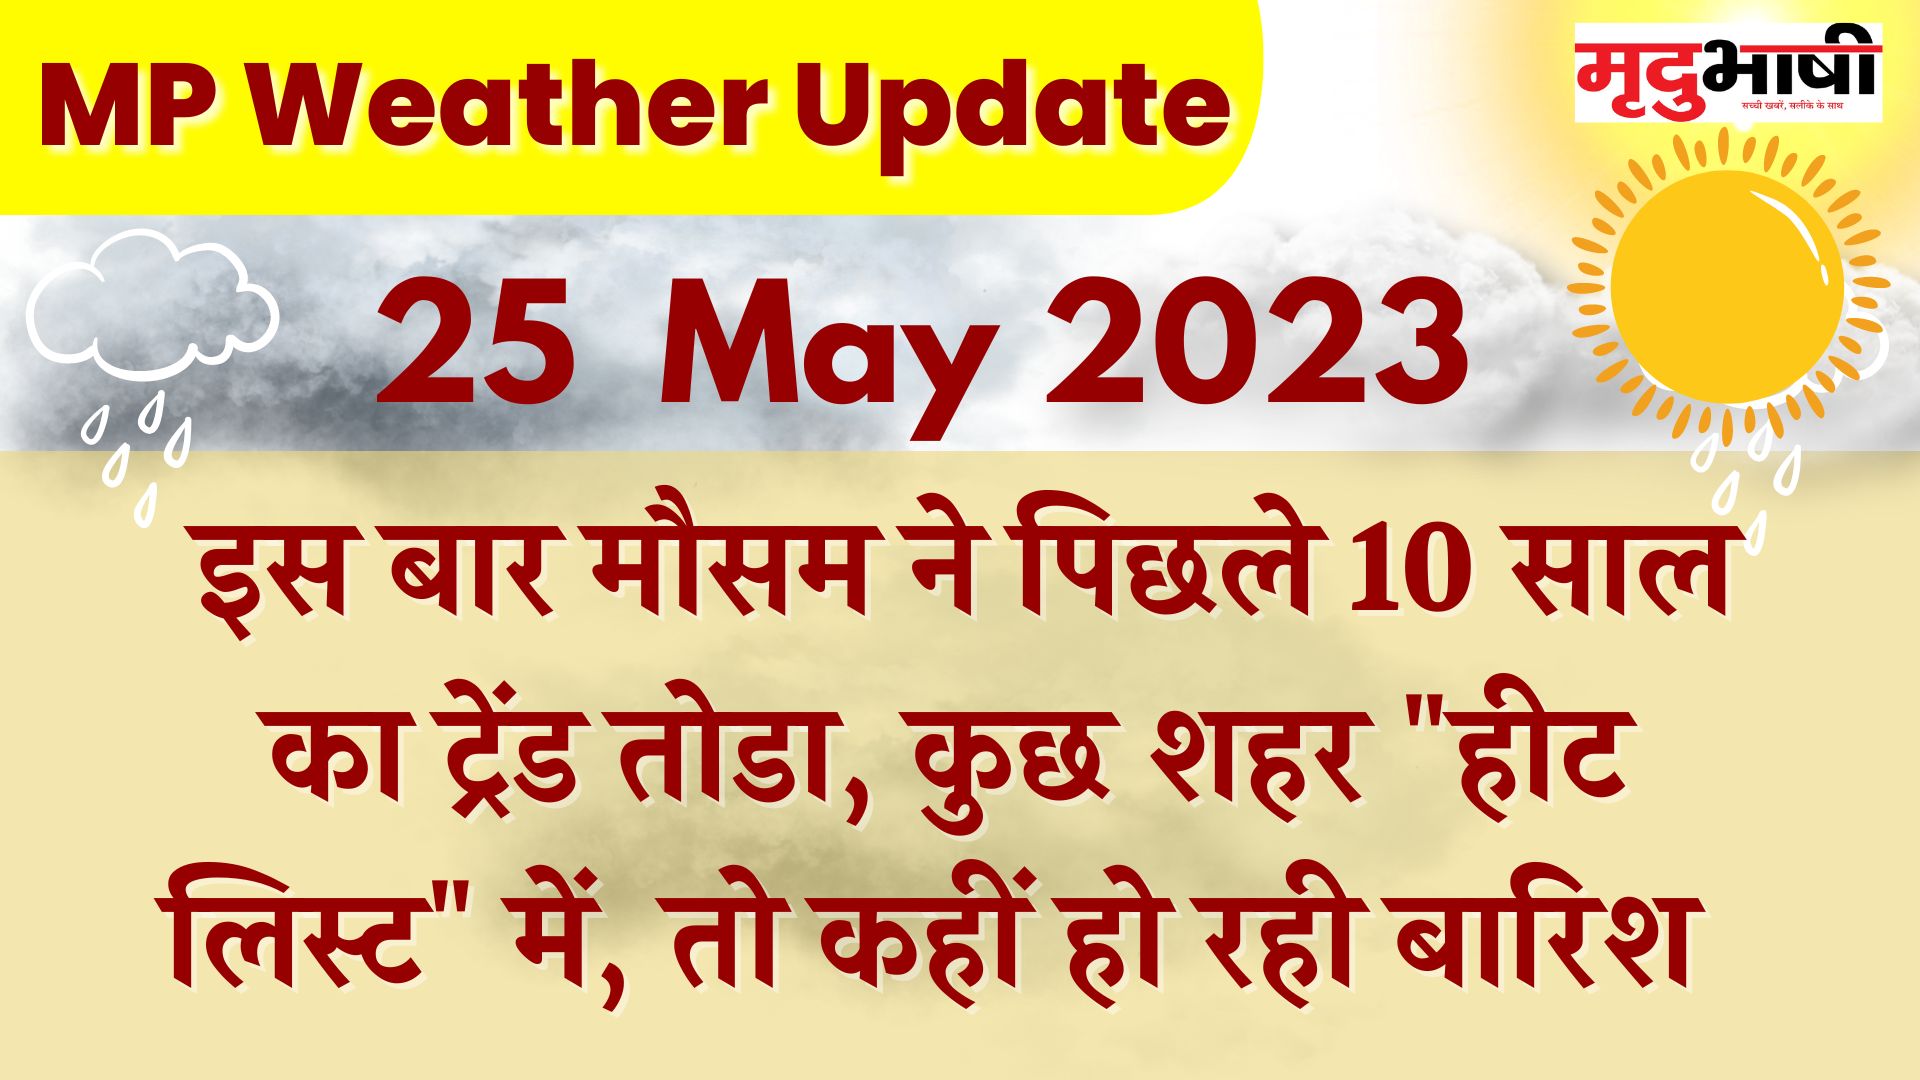 mp weather update 25 may 2023